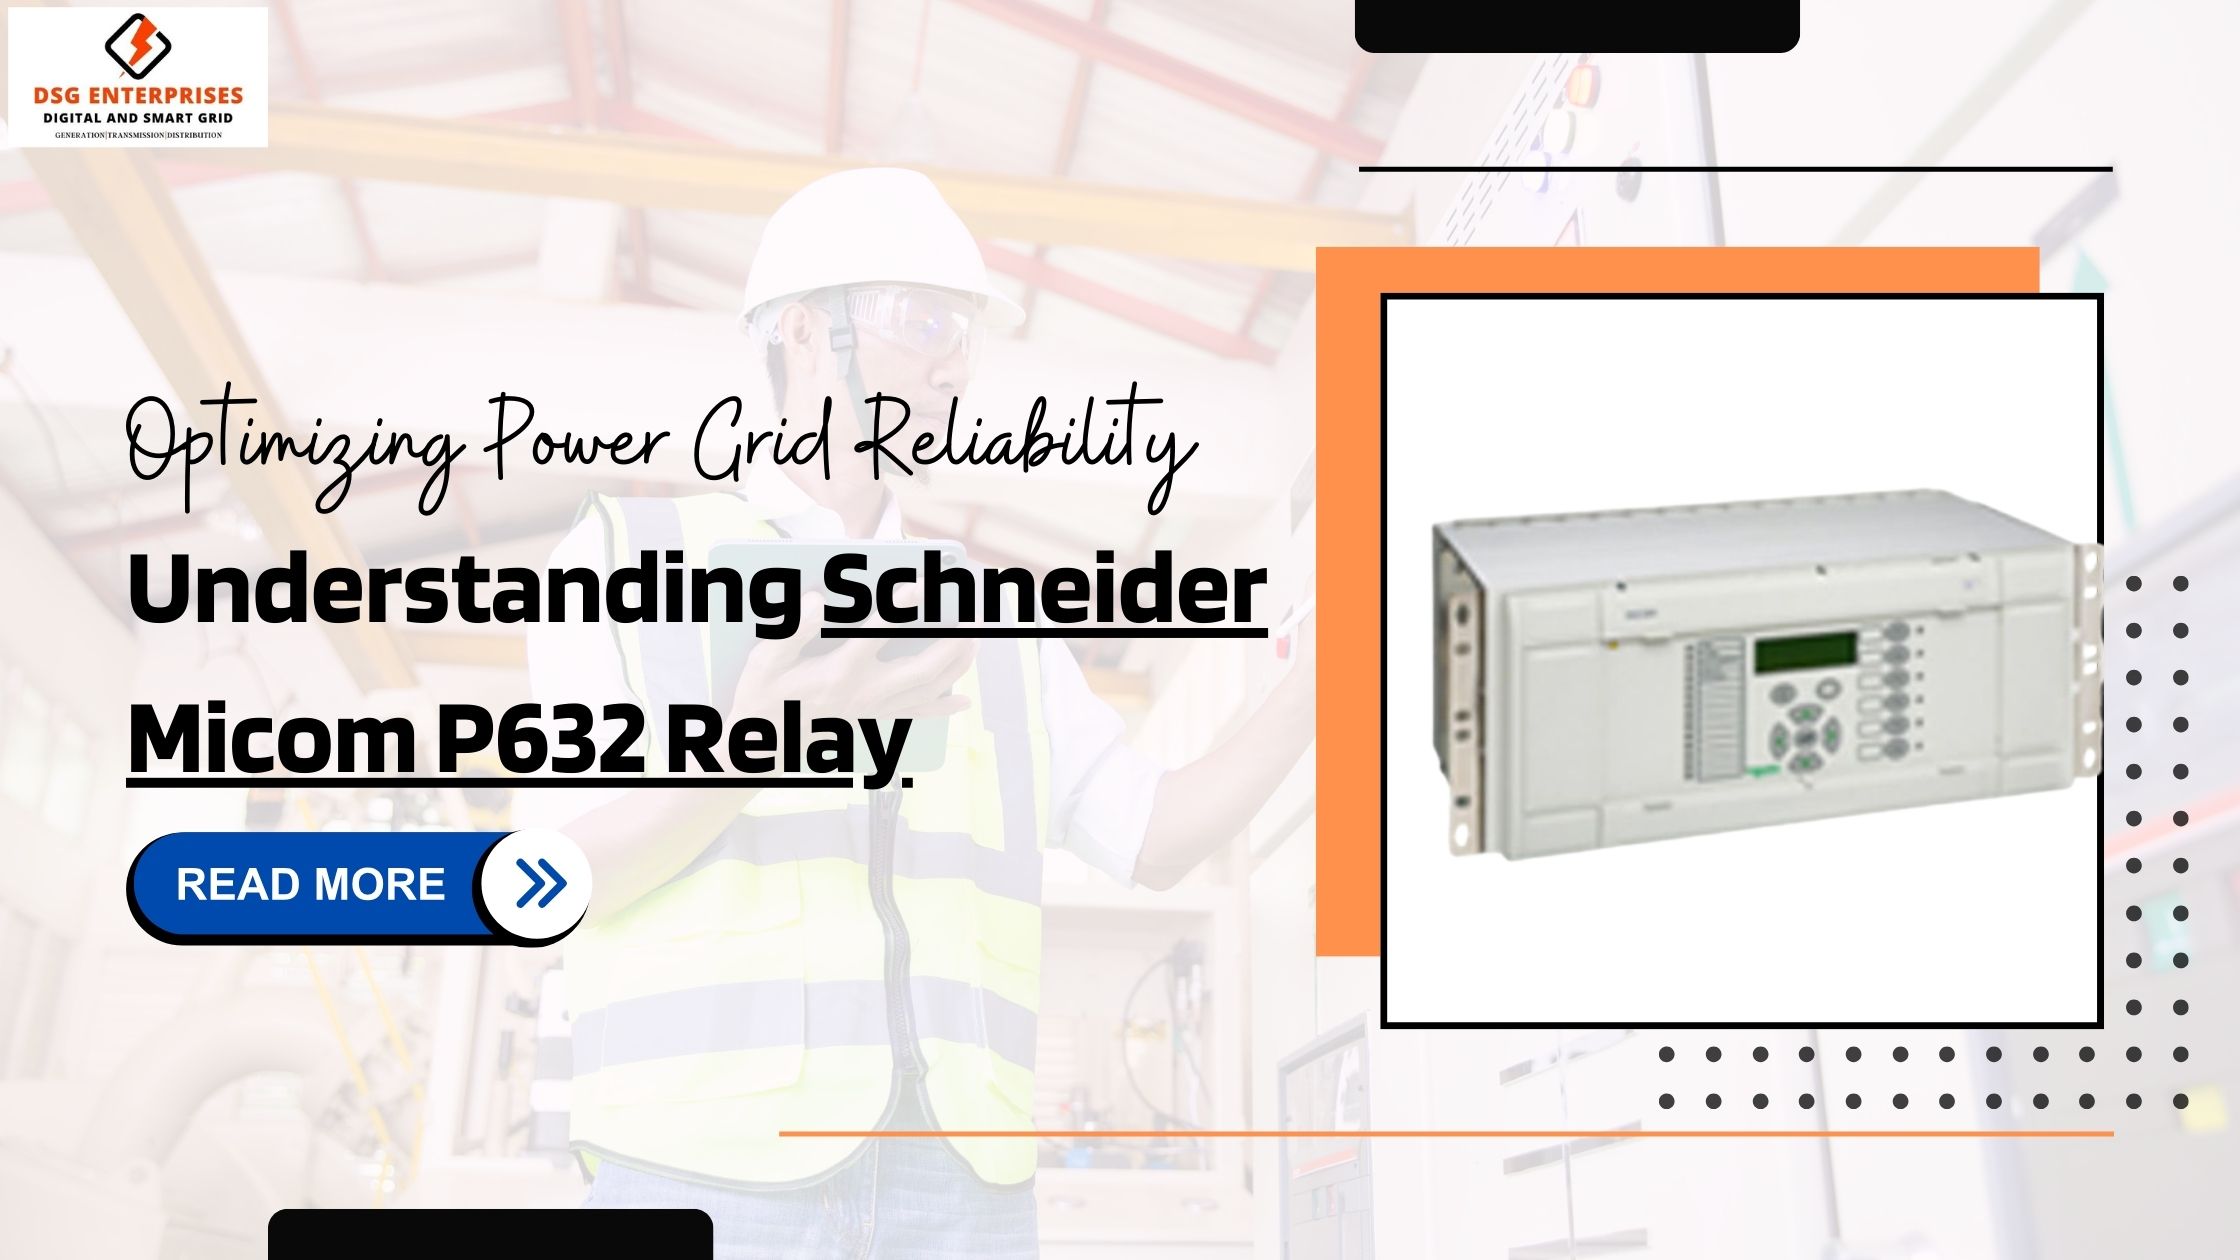 You are currently viewing Optimizing Power Grid Reliability: Understanding Schneider Micom P632 Relay